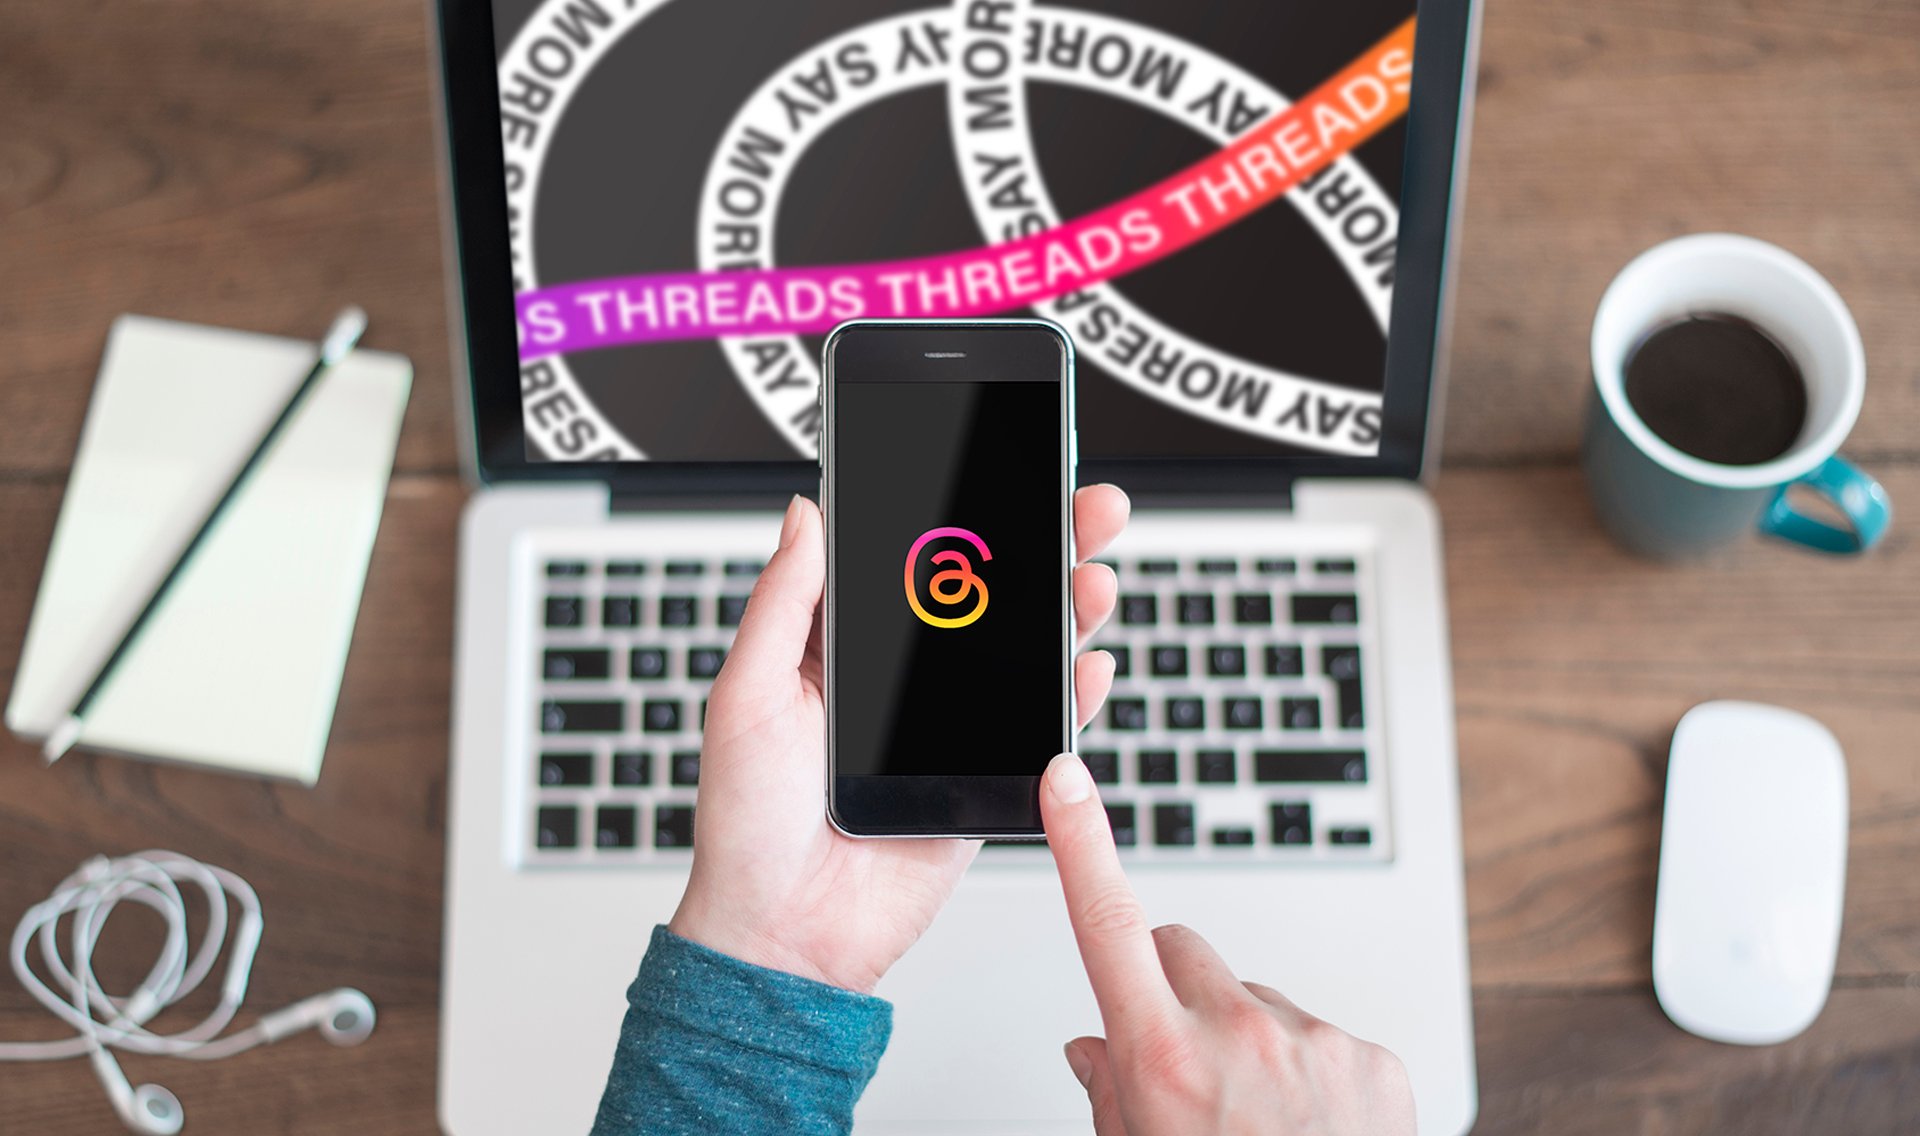 On-Target! Marketing & Advertising | Digital Marketers & Advertisers In Houston, Texas | Embrace the Thread: Understanding the Social Media Sensation that's Outpacing th..